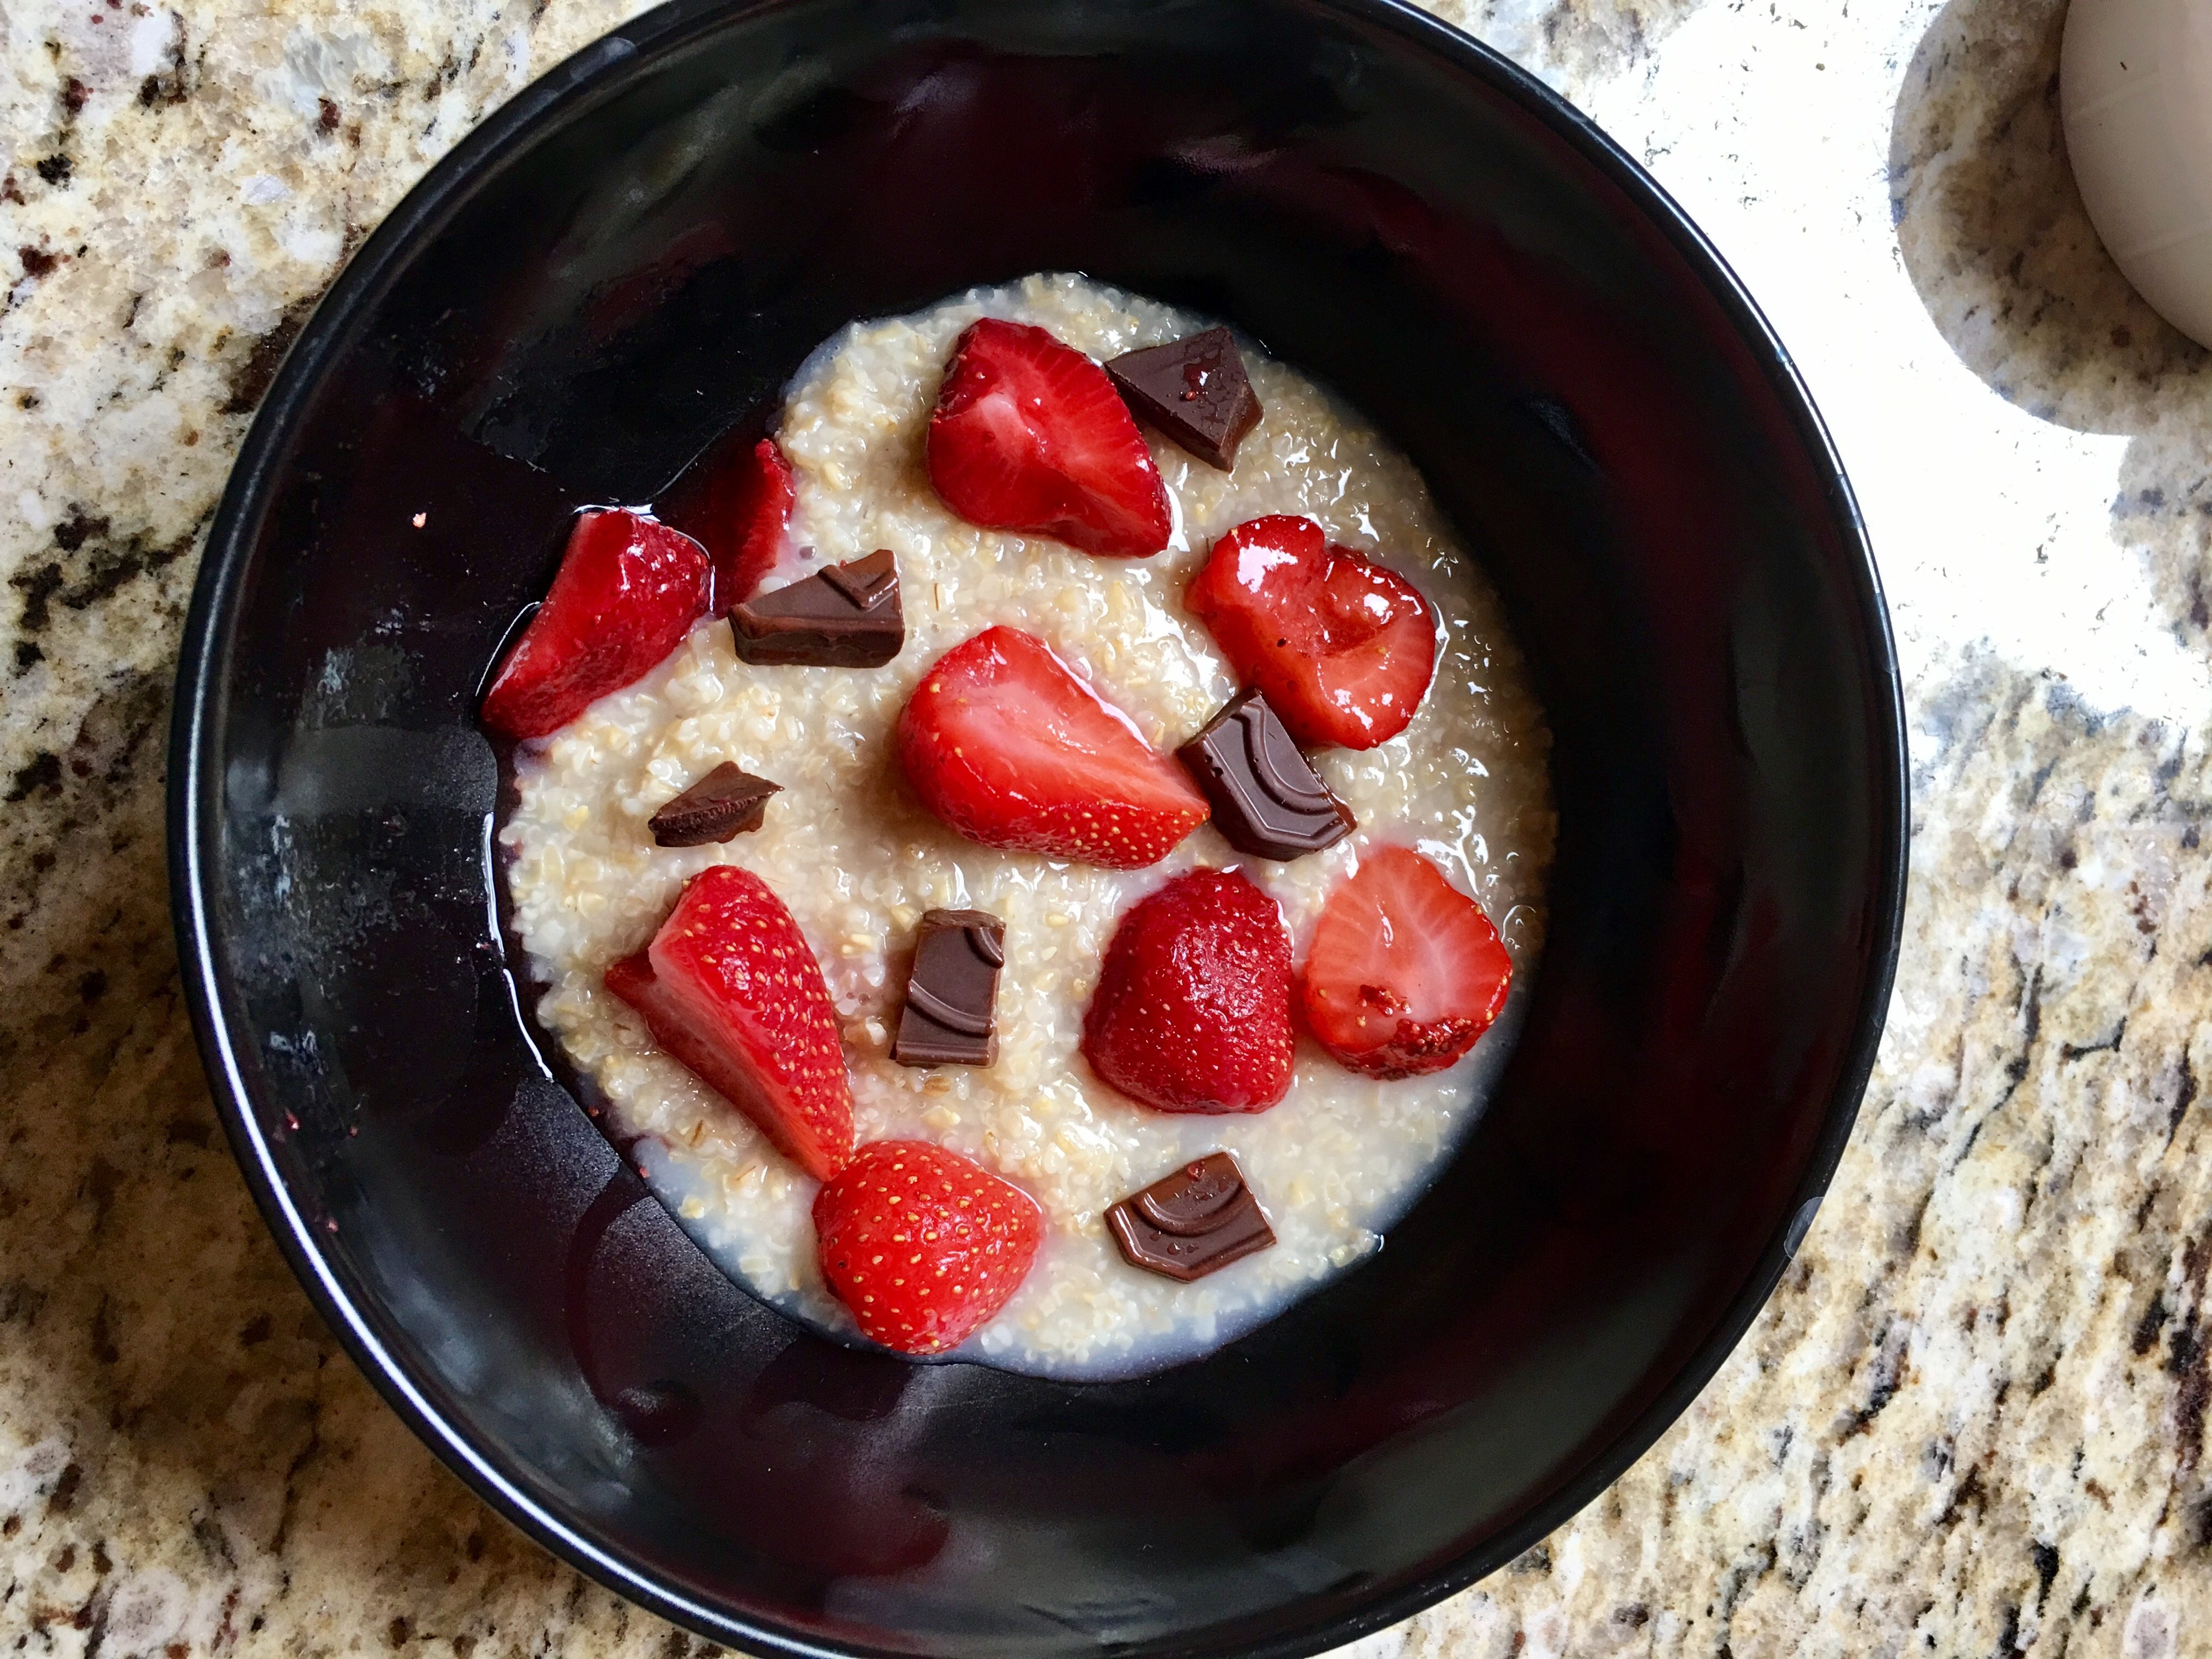 Breakfast: Steel cut oats with strawberries and dark chocolate